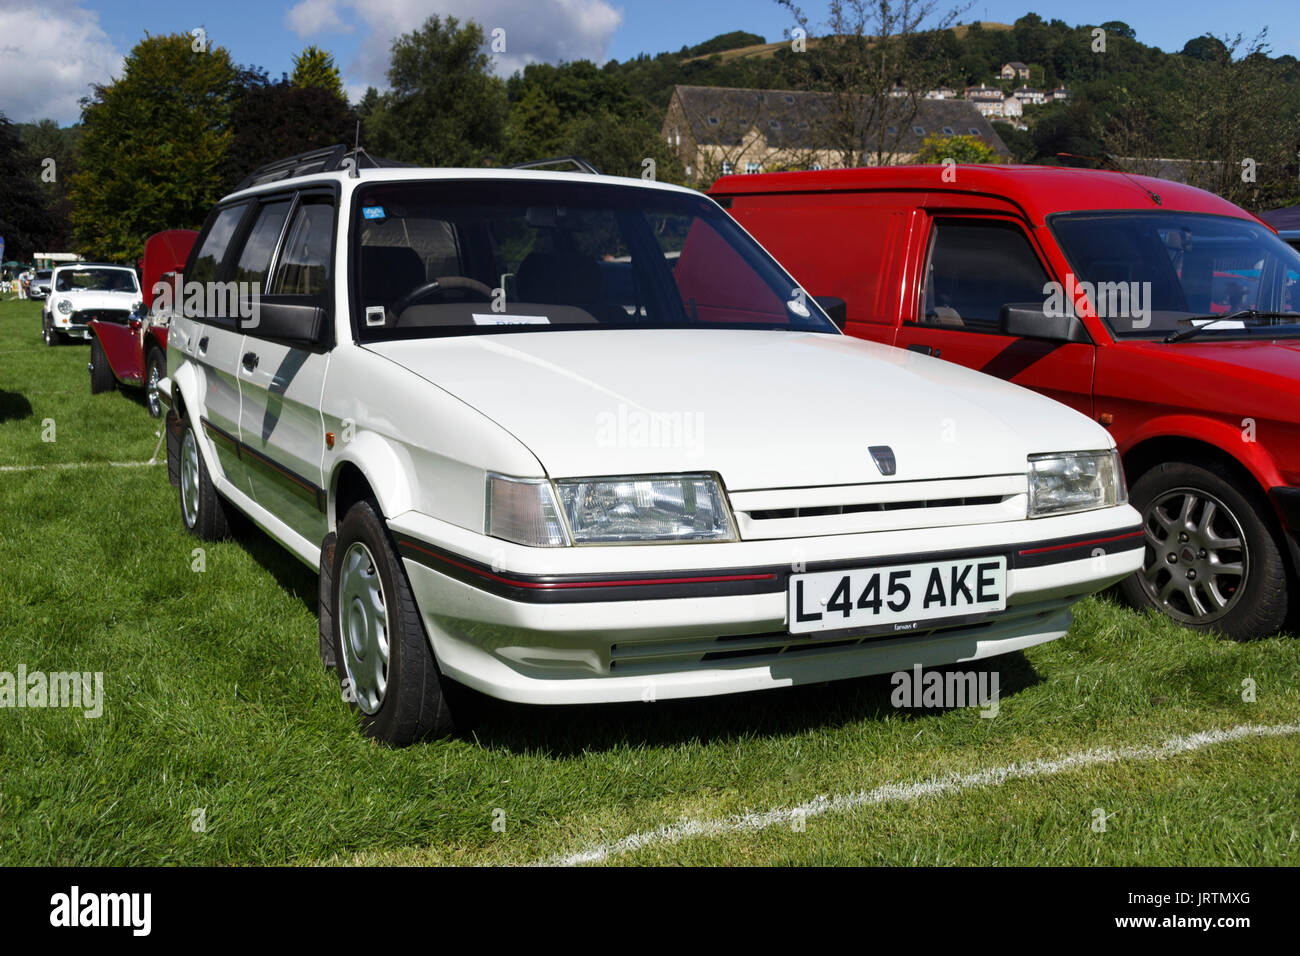 CAR OF THE MONTH – THE AUSTIN/MG/ROVER MONTEGO